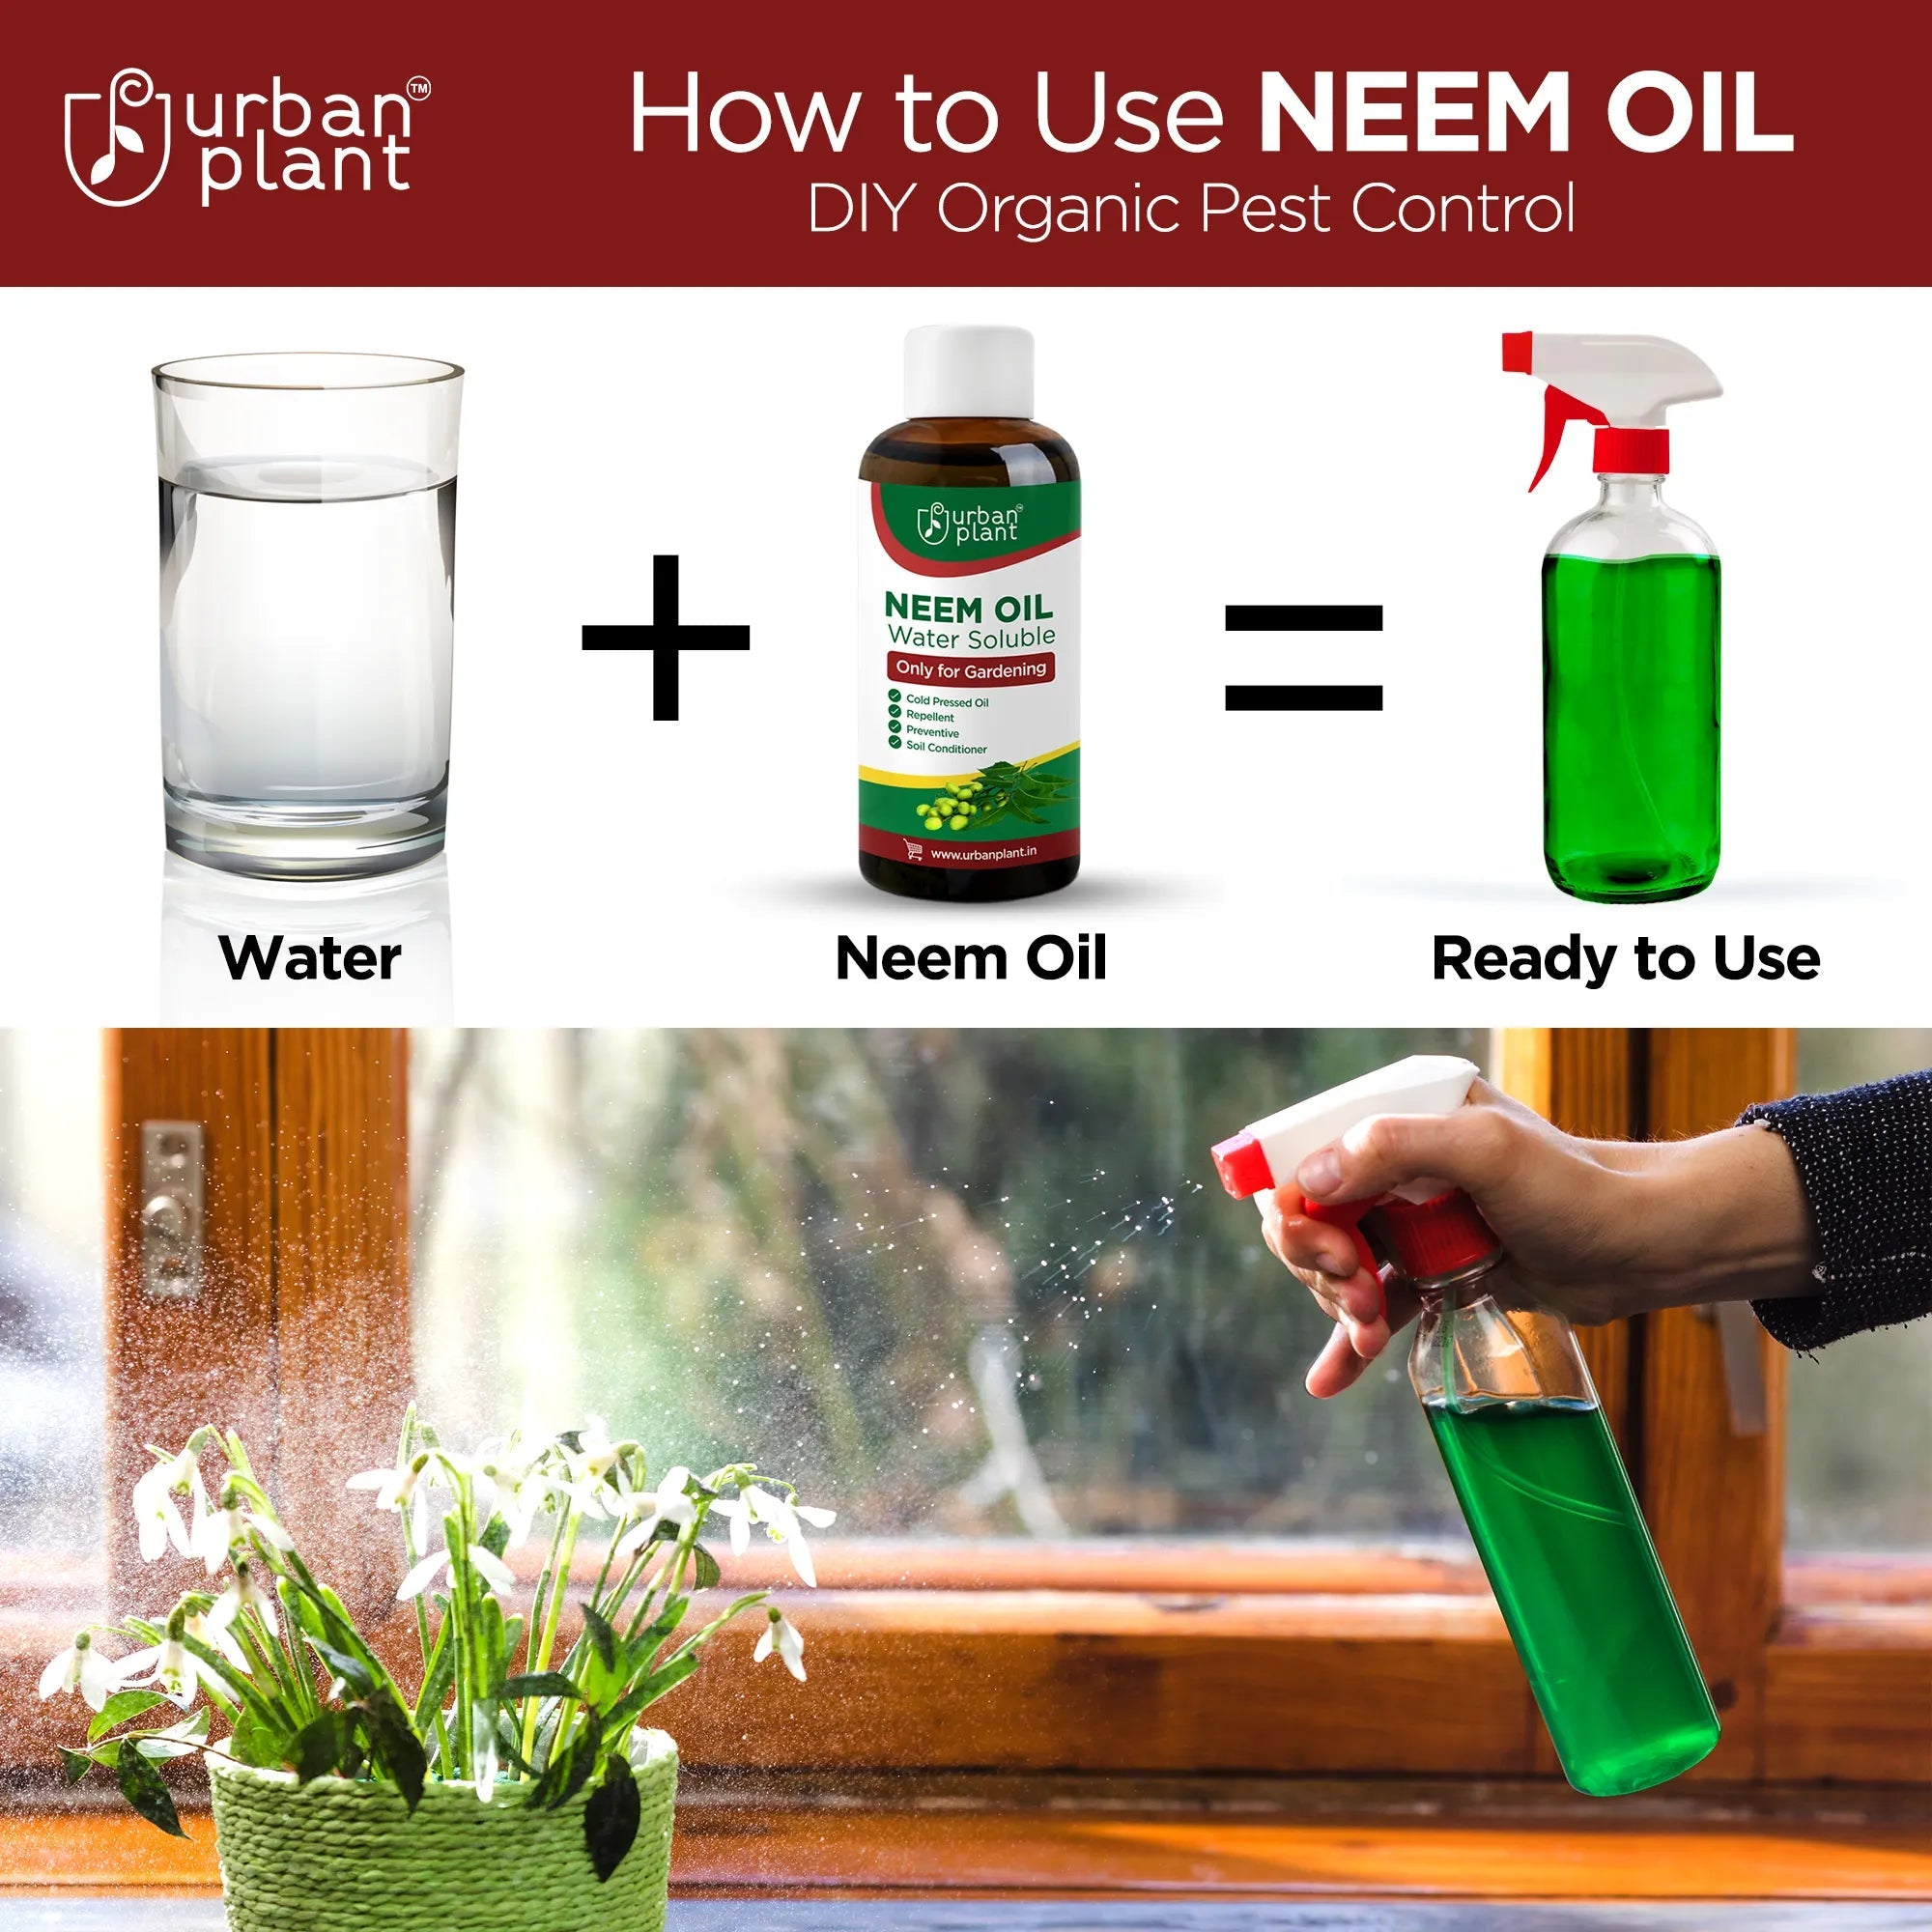 Urban Plant Neem Oil - Water Soluble Organic for Easy Spray on Garden and Indoor/Outdoor plants- 100ml Plant Care Urban Plant 